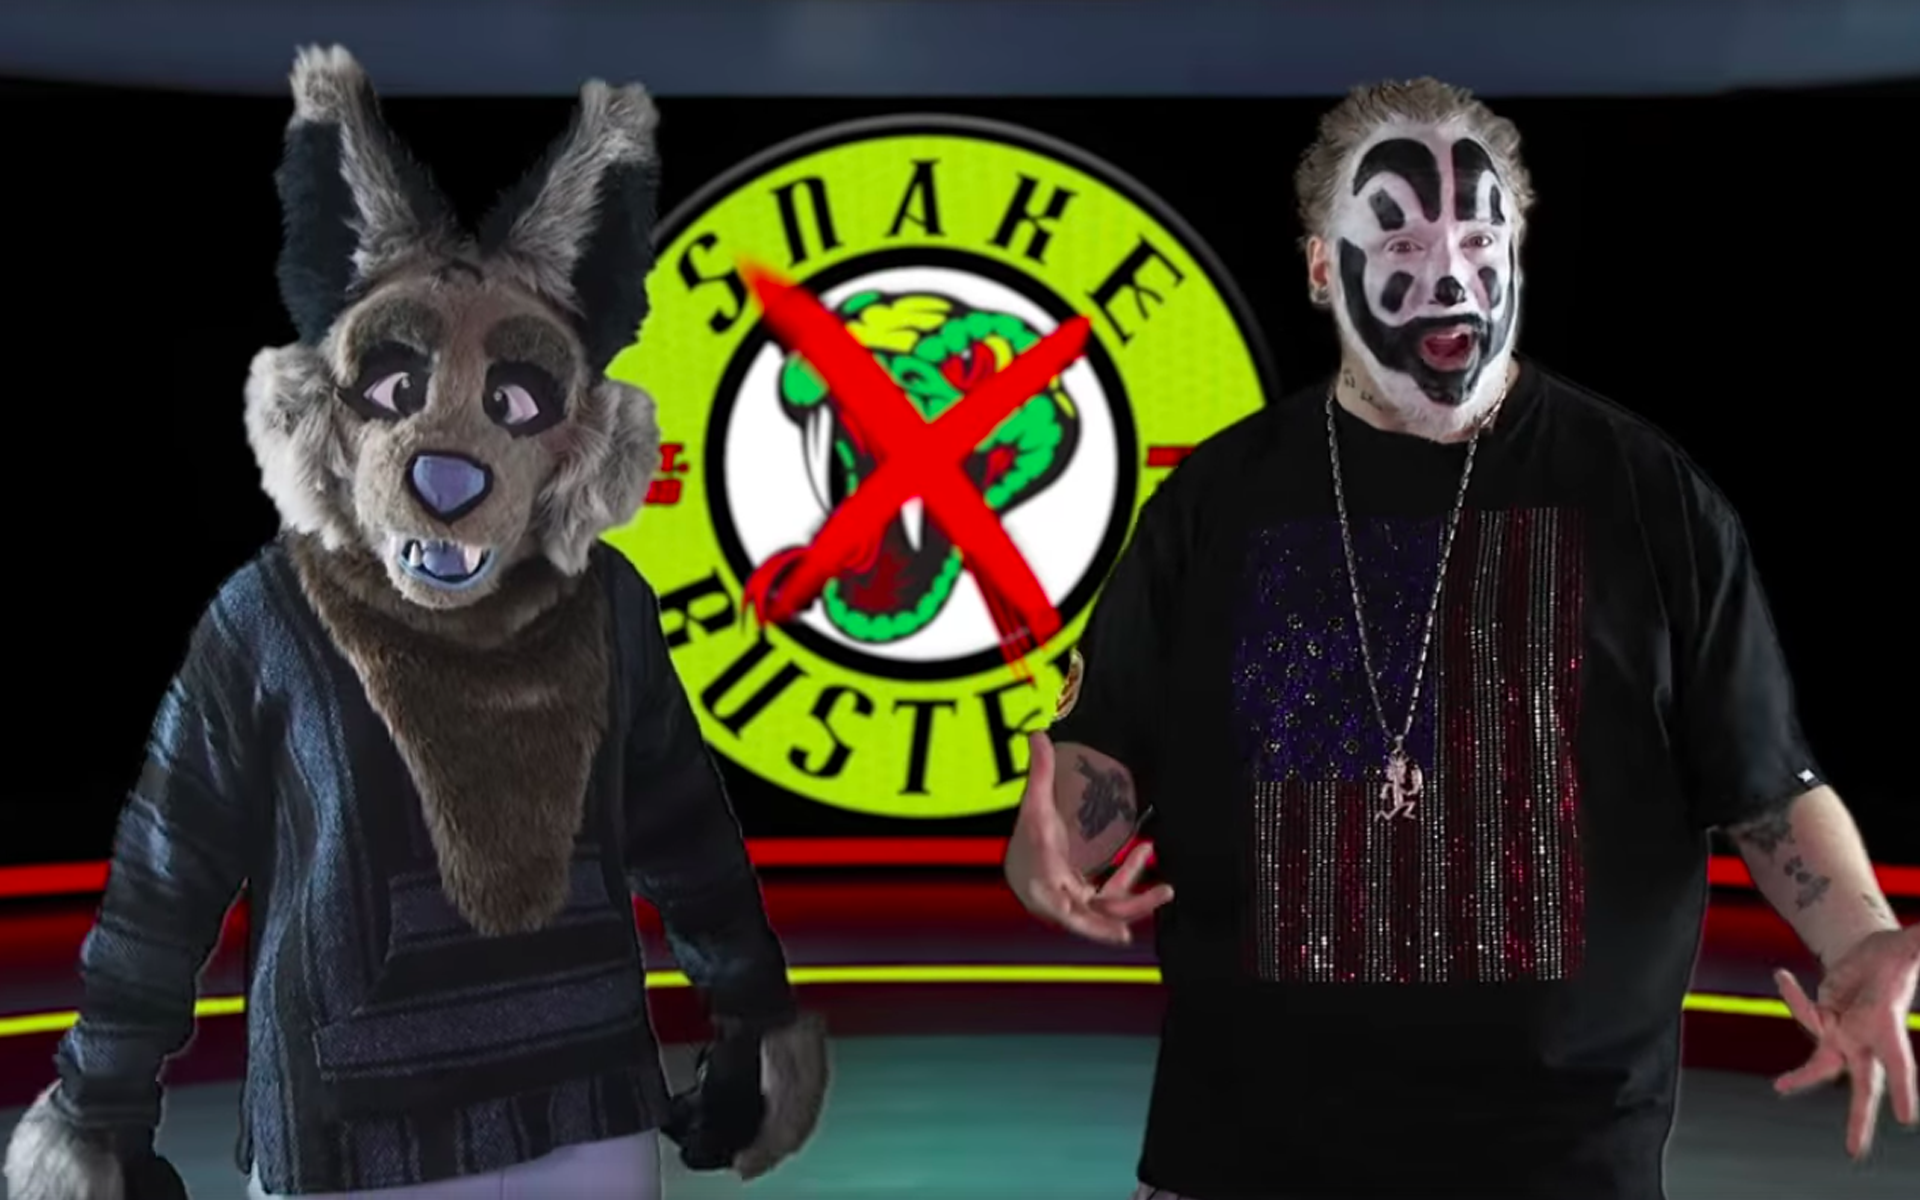 In The Orwellian Future, Juggalos And Furries Stand As Unlikely Allies Against The Surveillance State